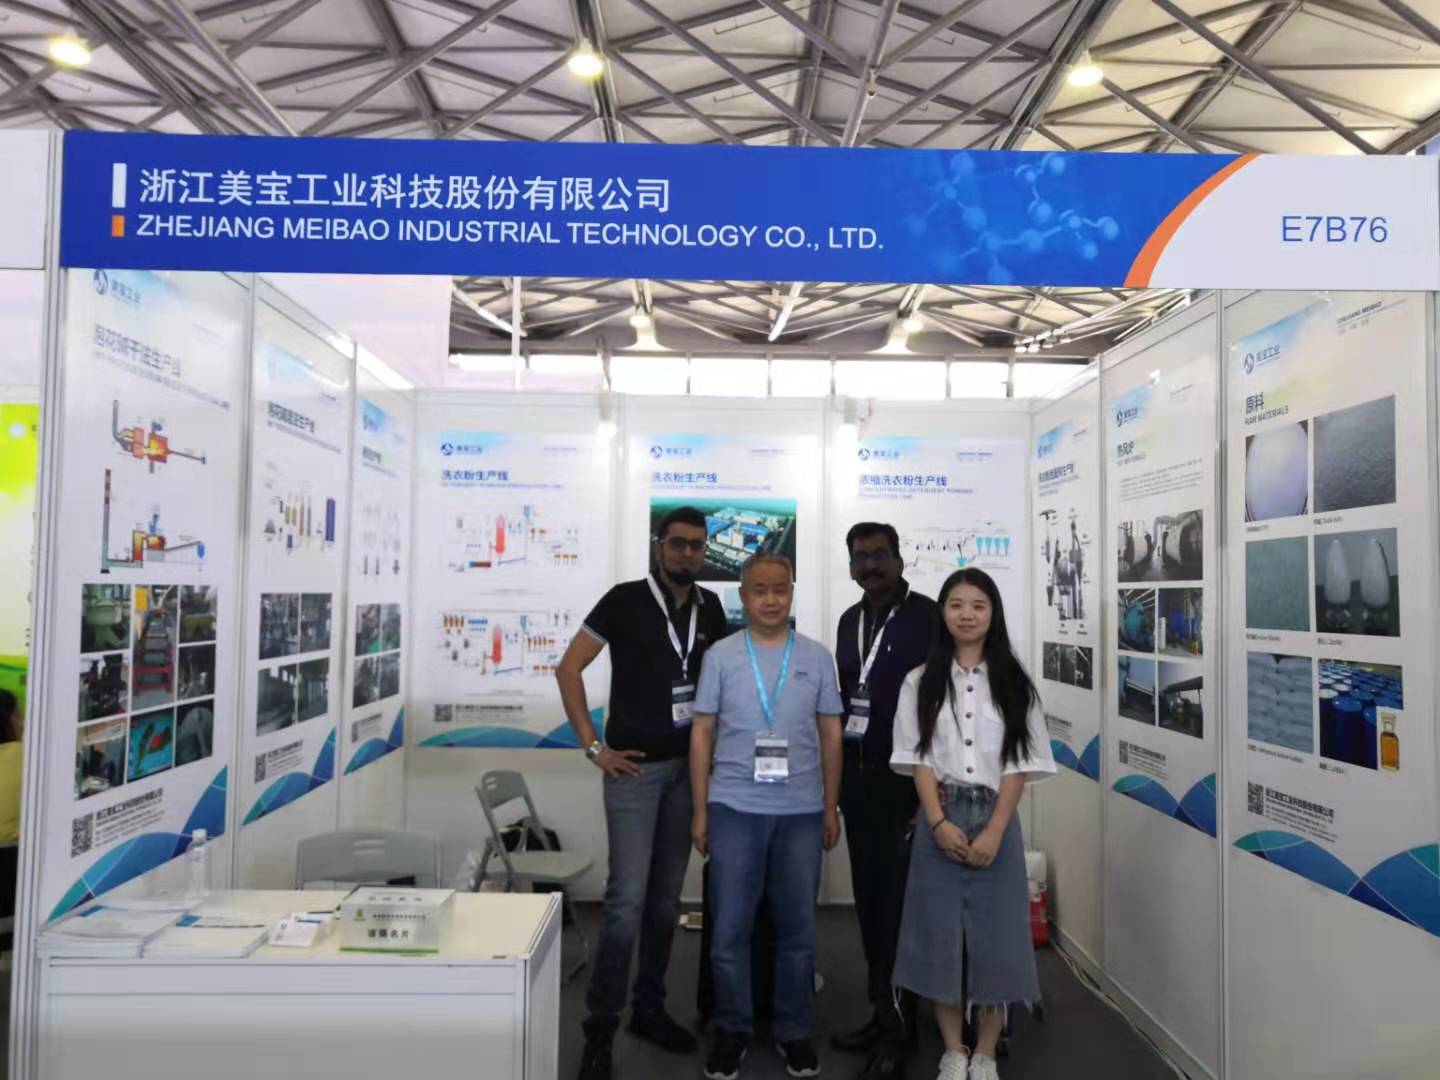 The 18th ICIF China in 2019 was held in Shanghai